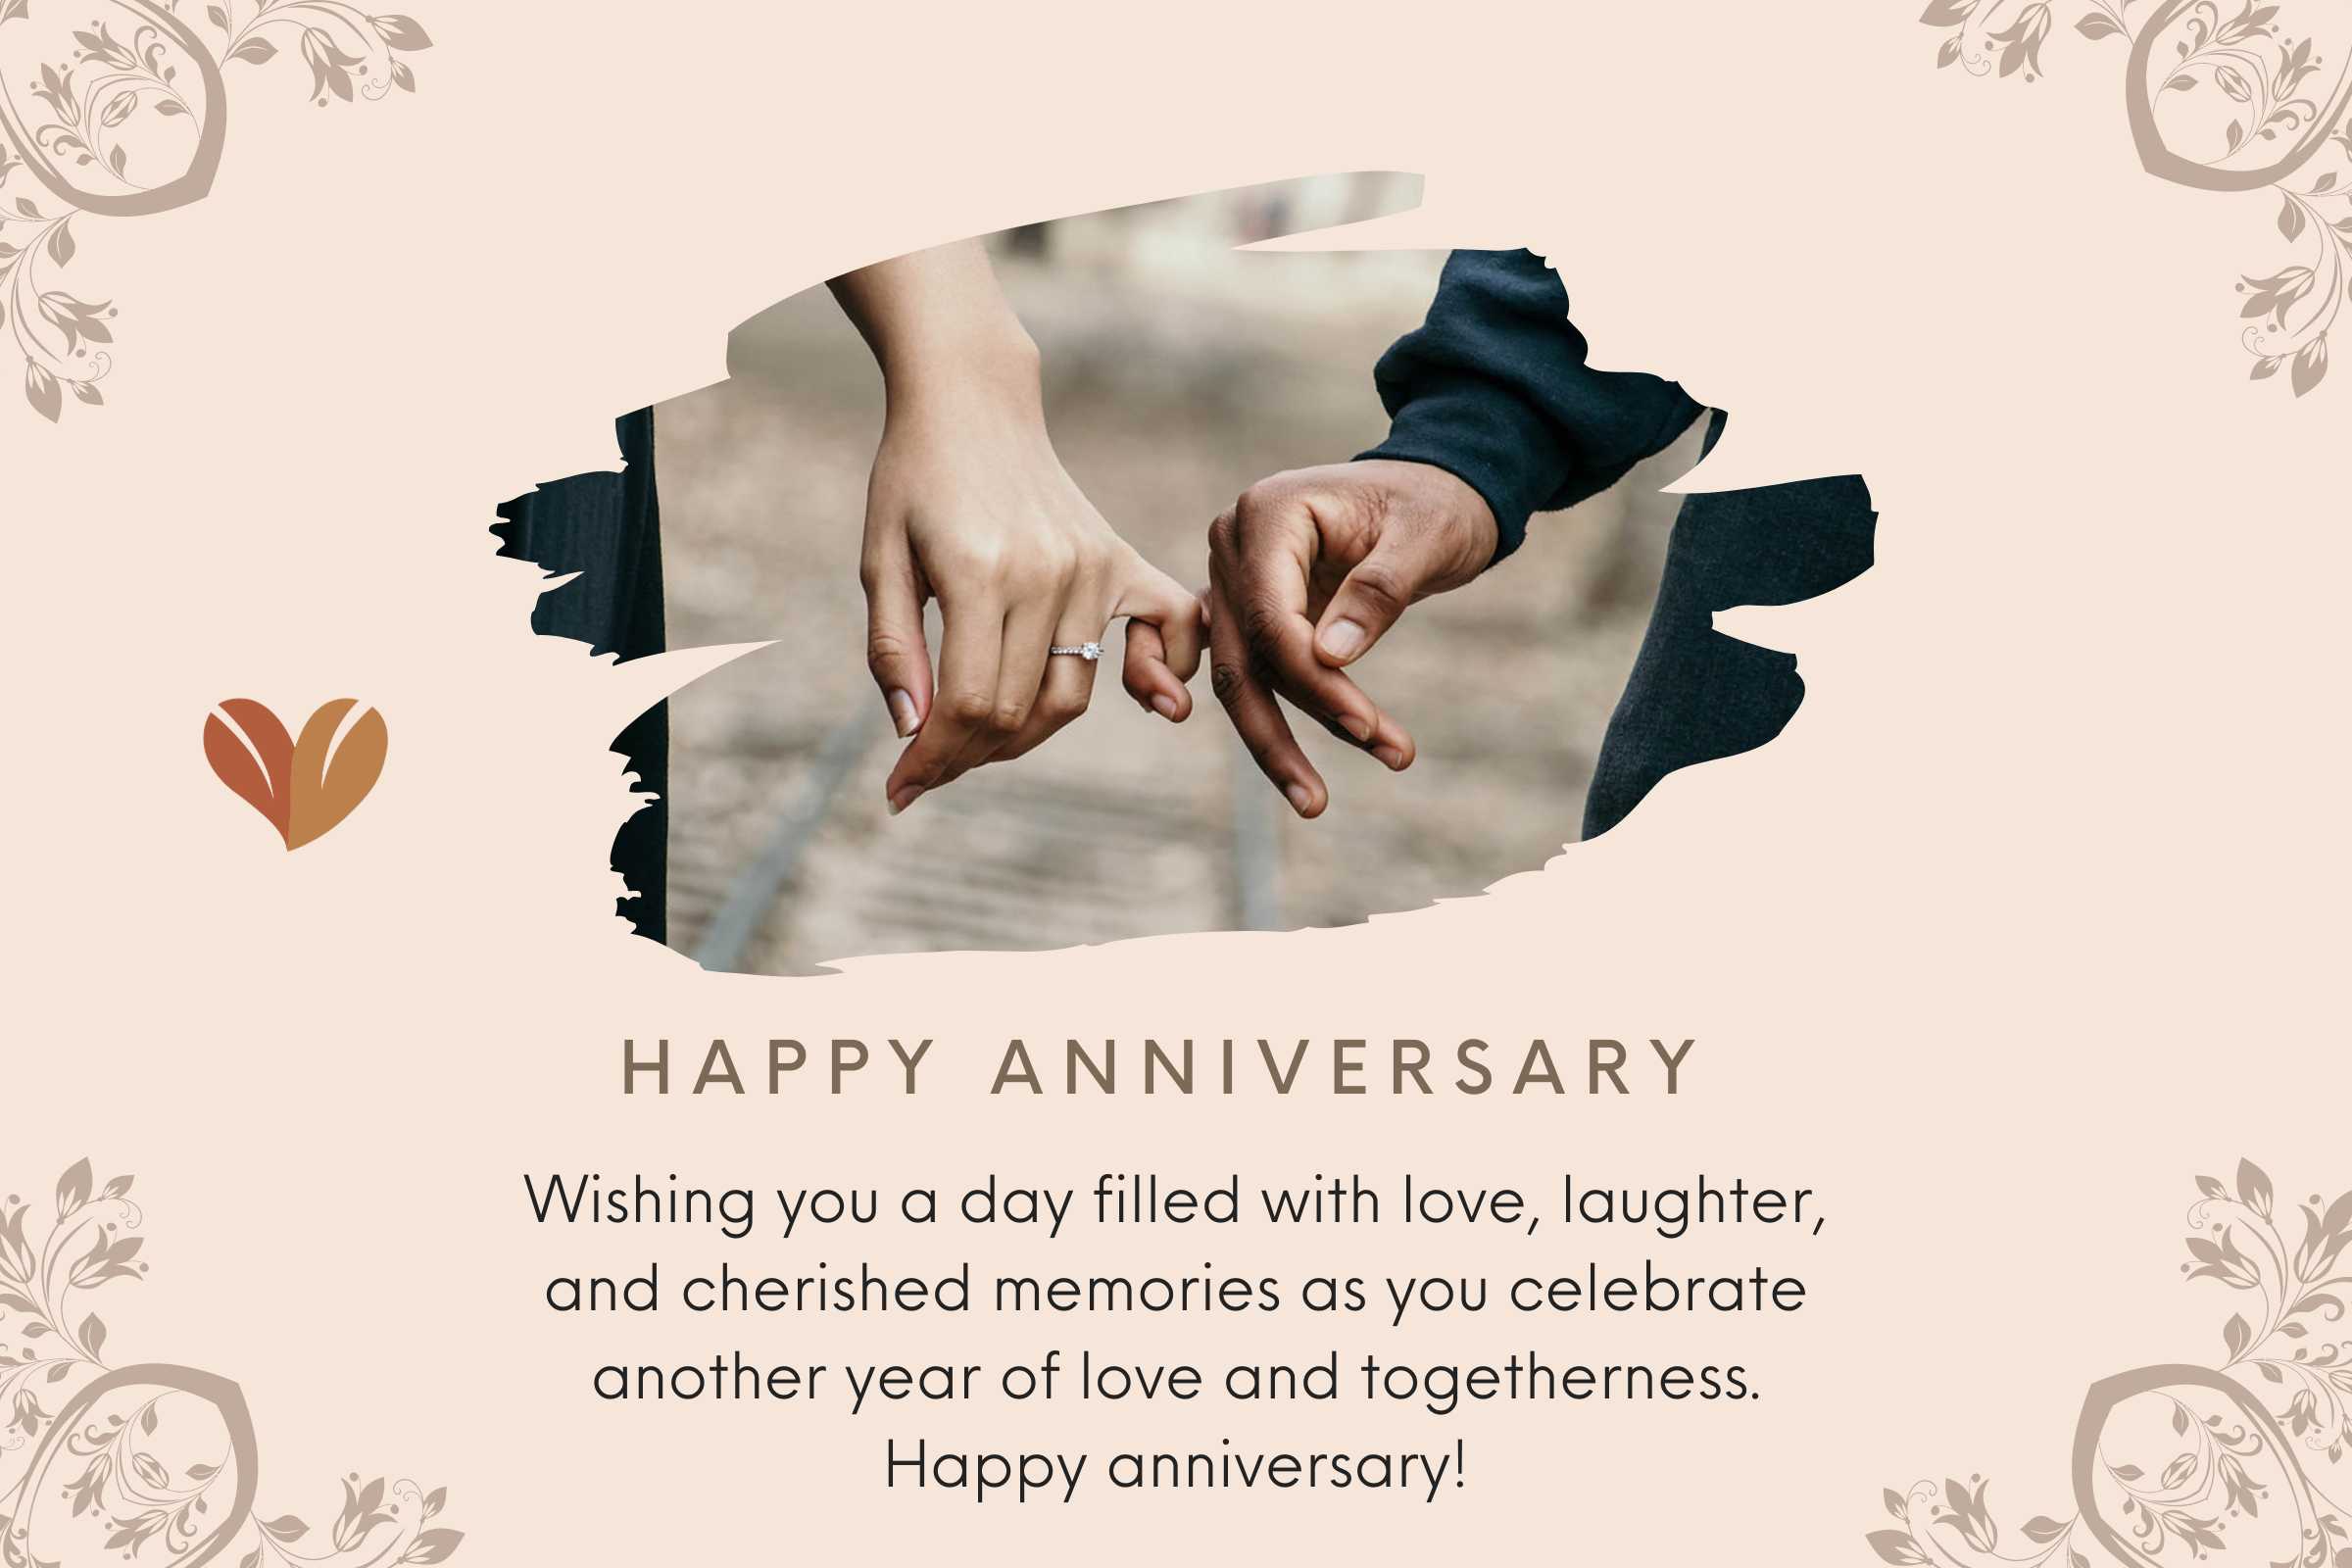 May the love you share continue to grow and blossom - Anniversary wishes for Couples